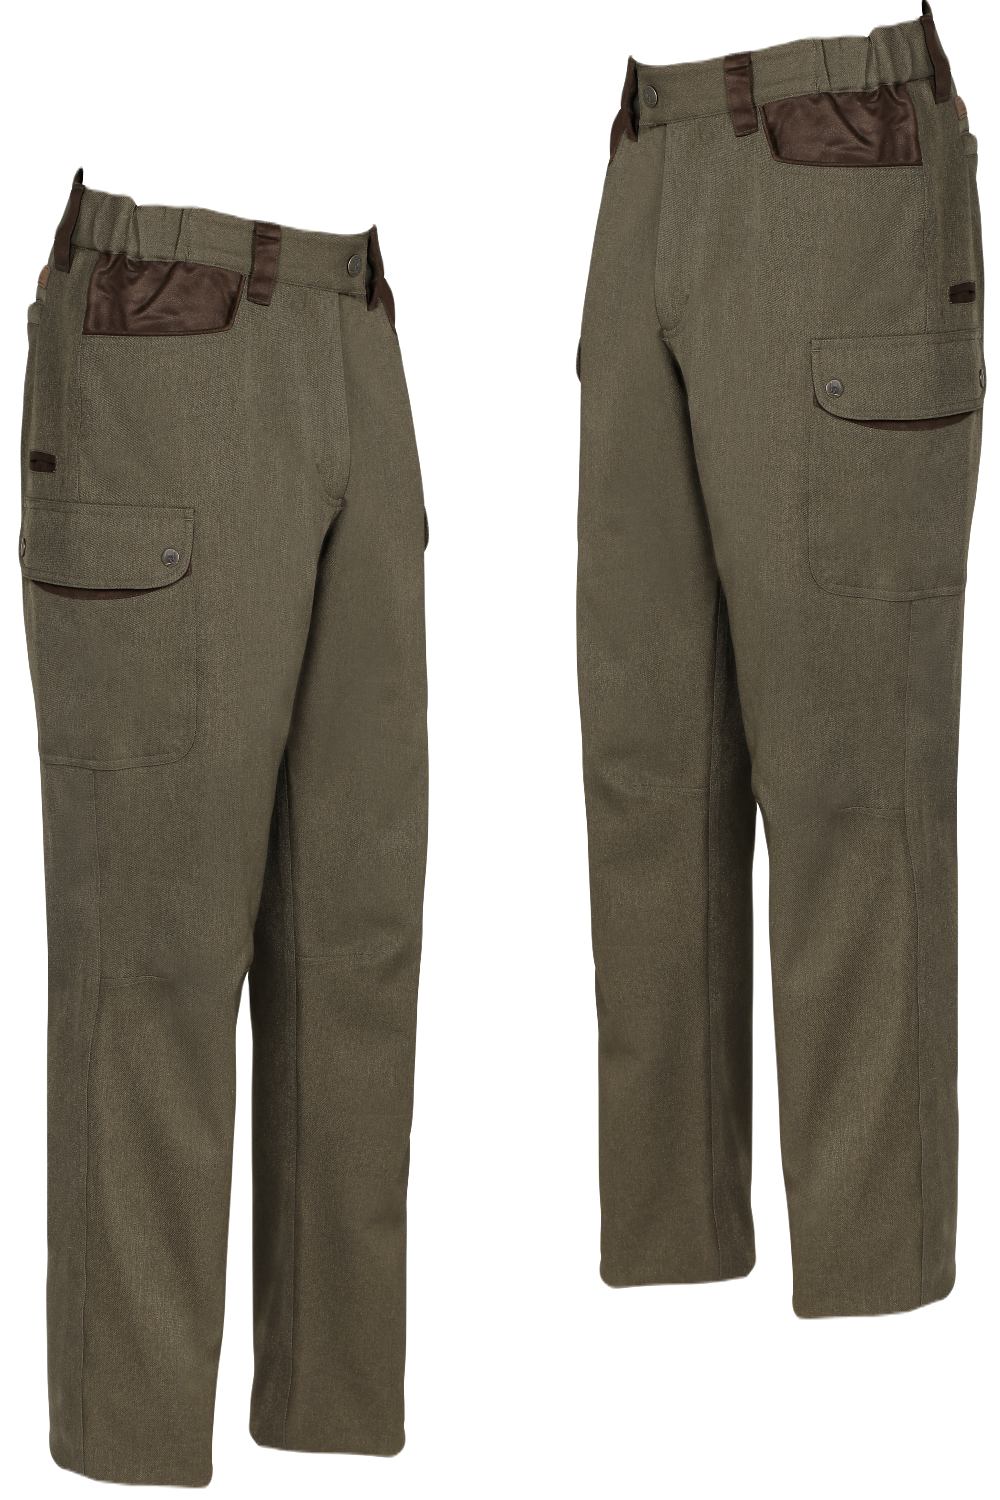 Percussion Berry Waterproof Trousers in Khaki